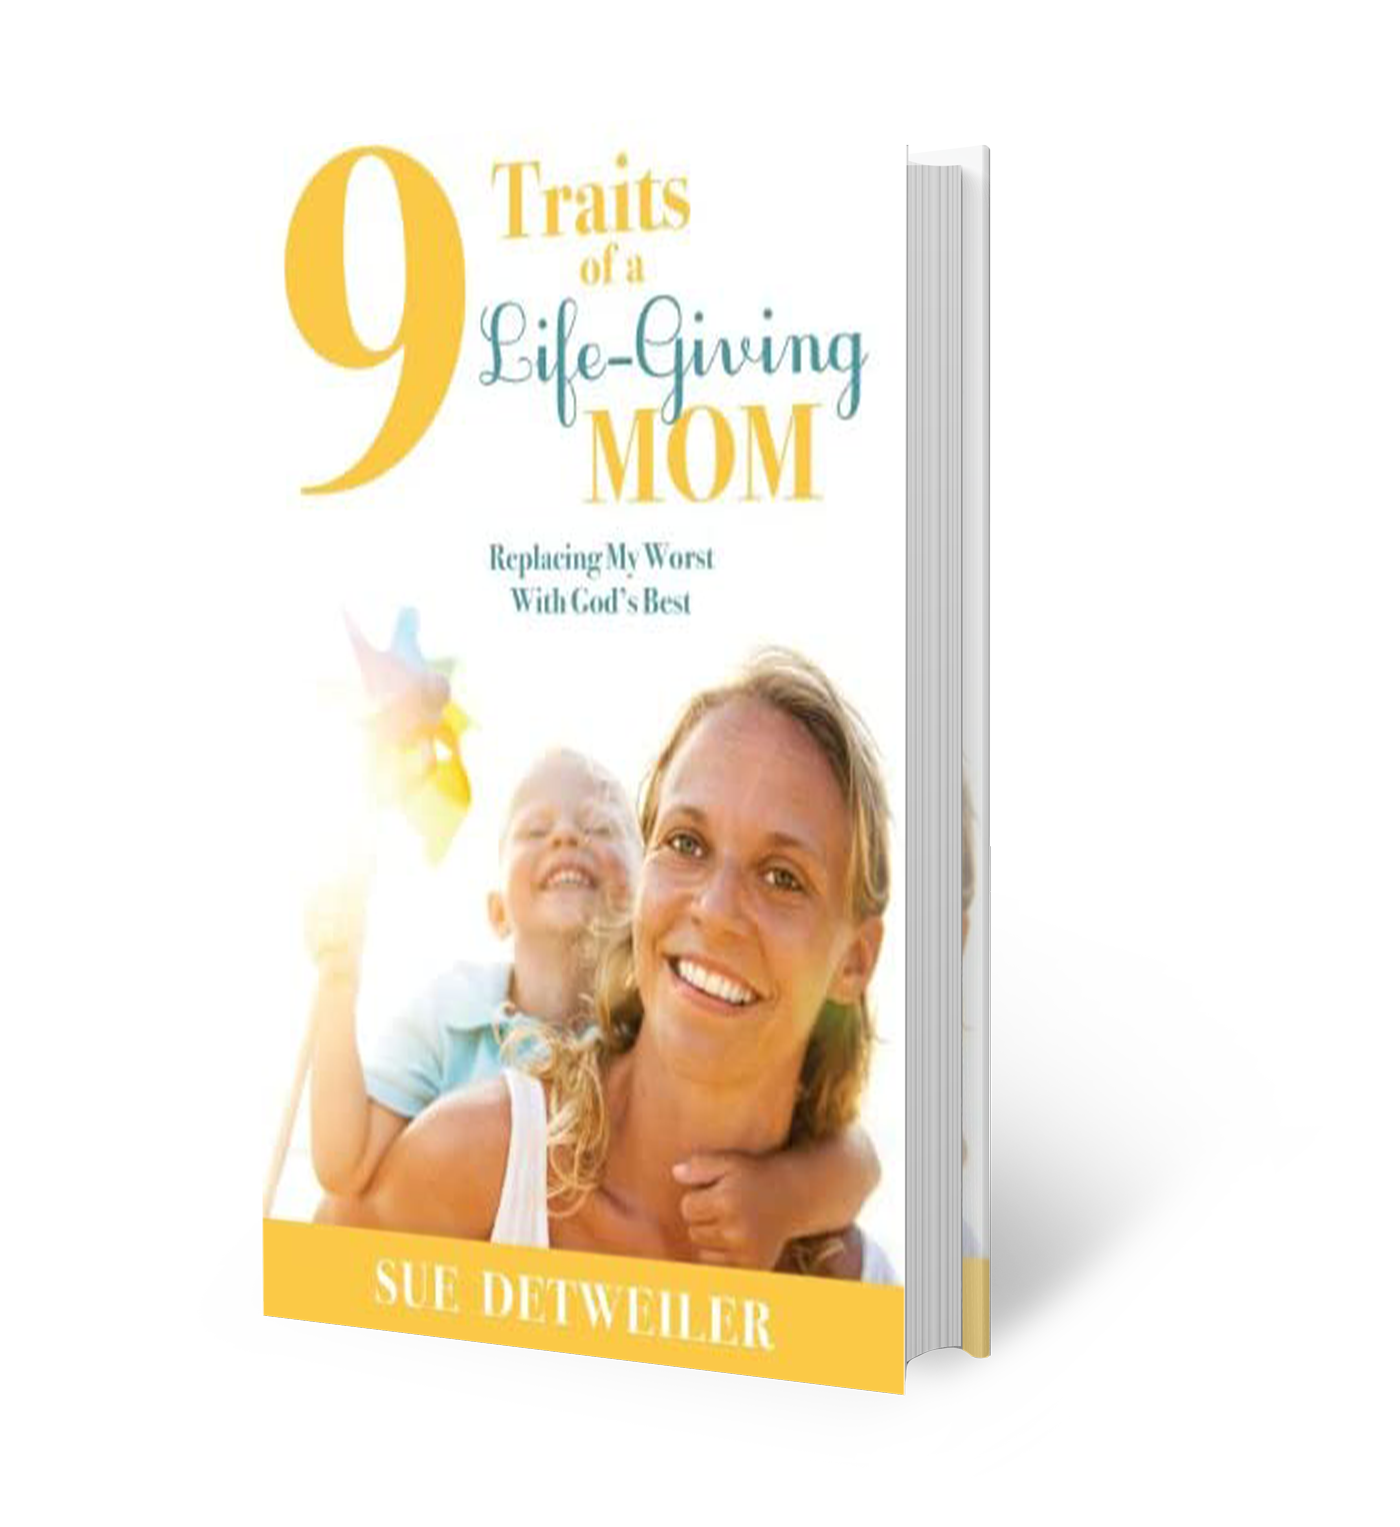 9 Traits of a Life-Giving Mom by Sue Detweiler